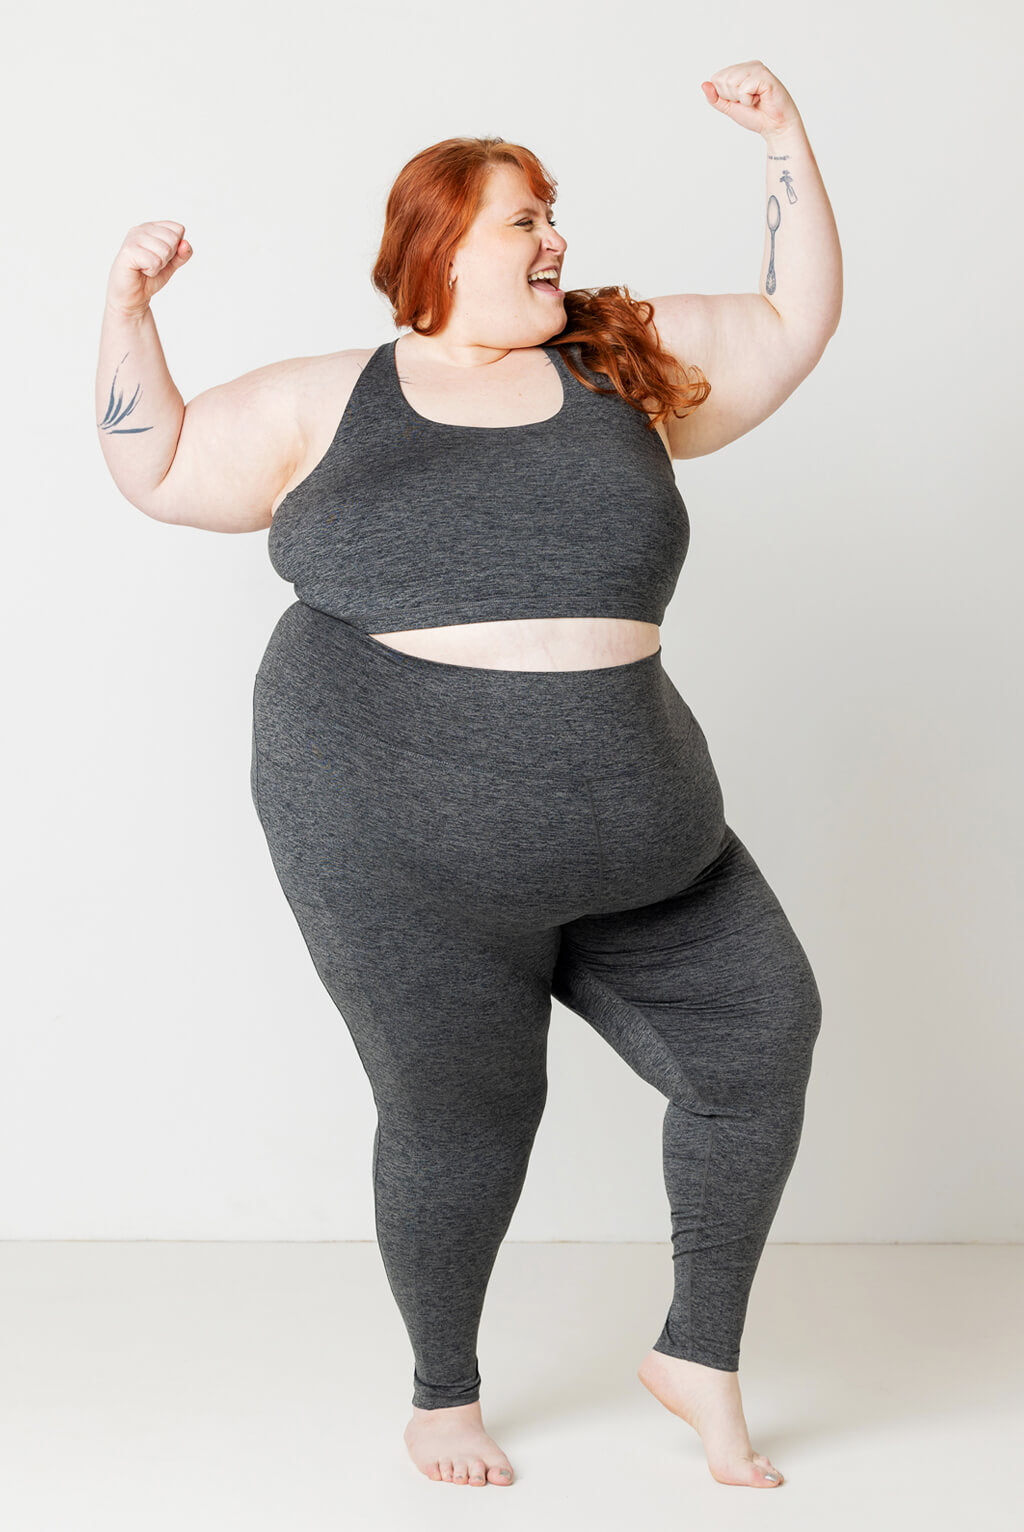 Plus size model posing with strong arms in Superfit Hero SuperSoft Pocket leggings in Size 5X